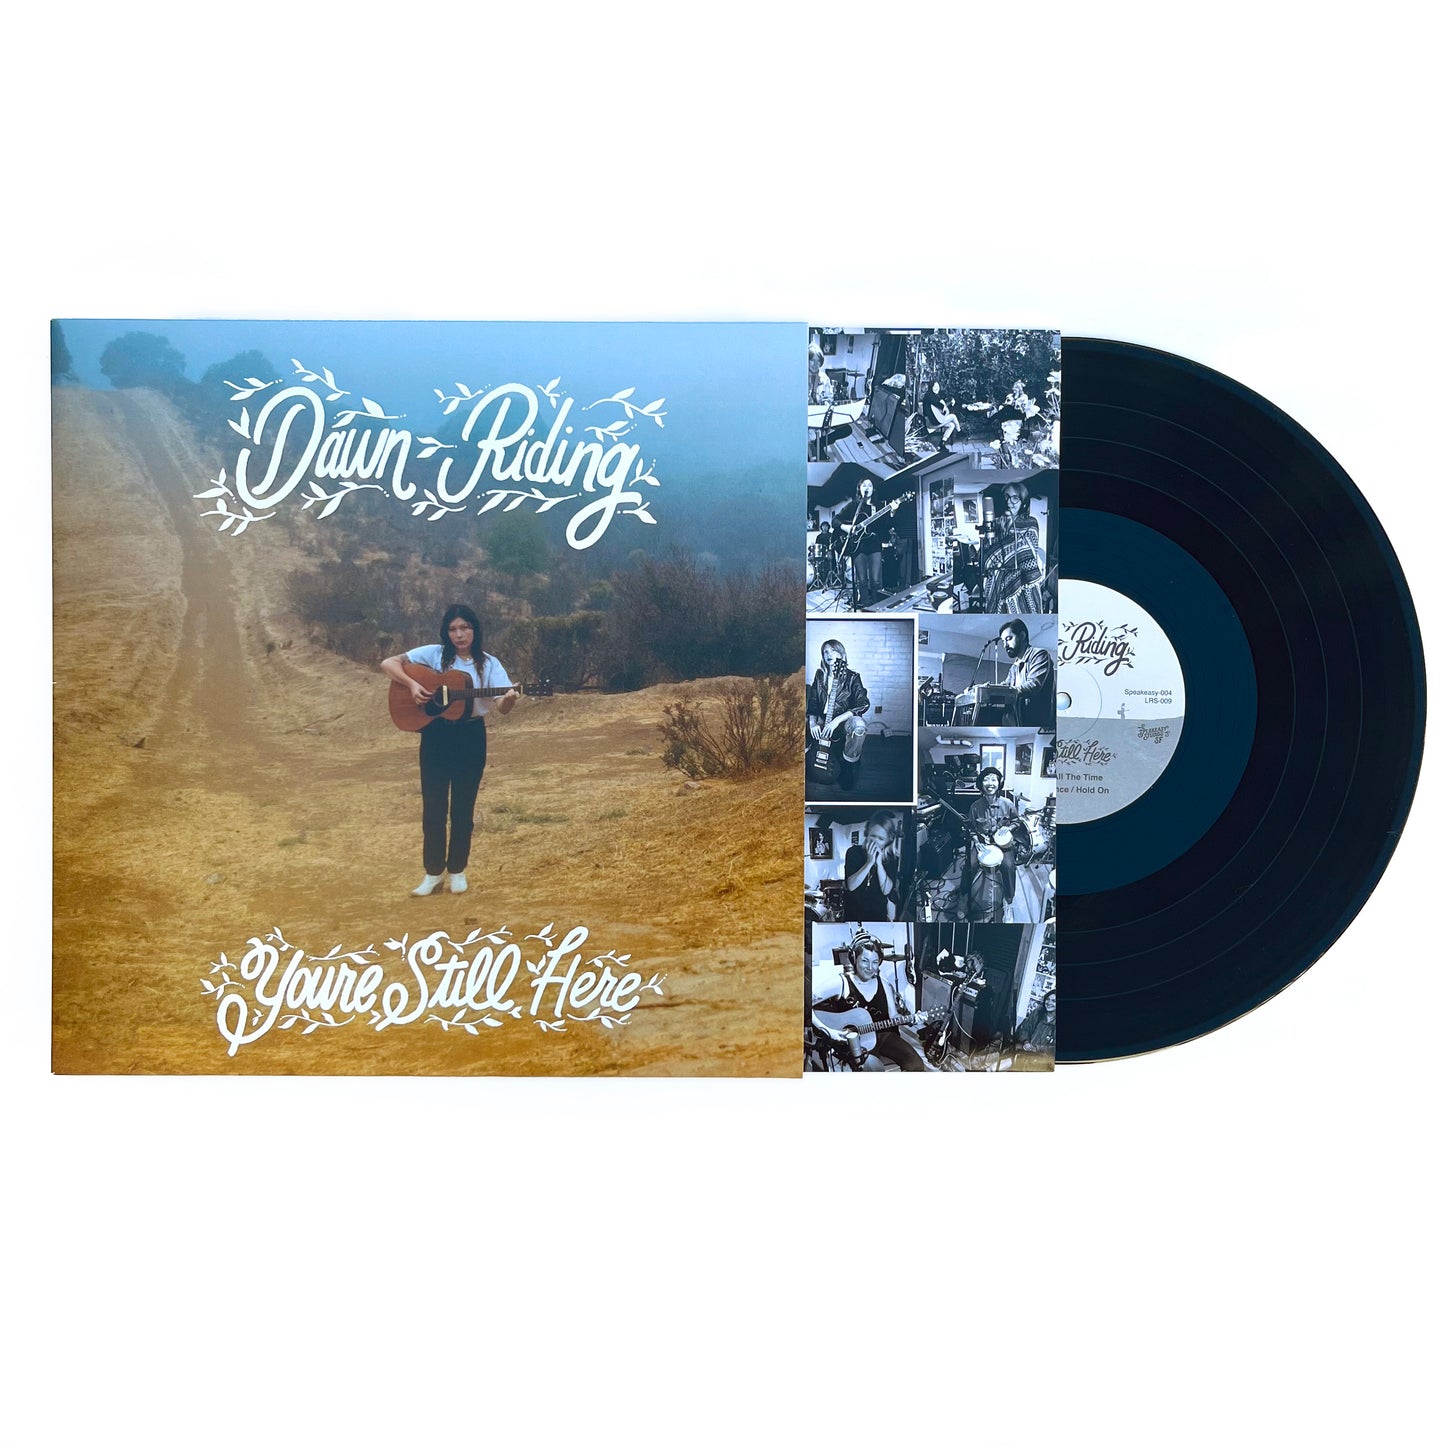 Speakeasy 004 - "You're Still Here" by Dawn Riding - Limited Edition First Pressing Black Vinyl LP